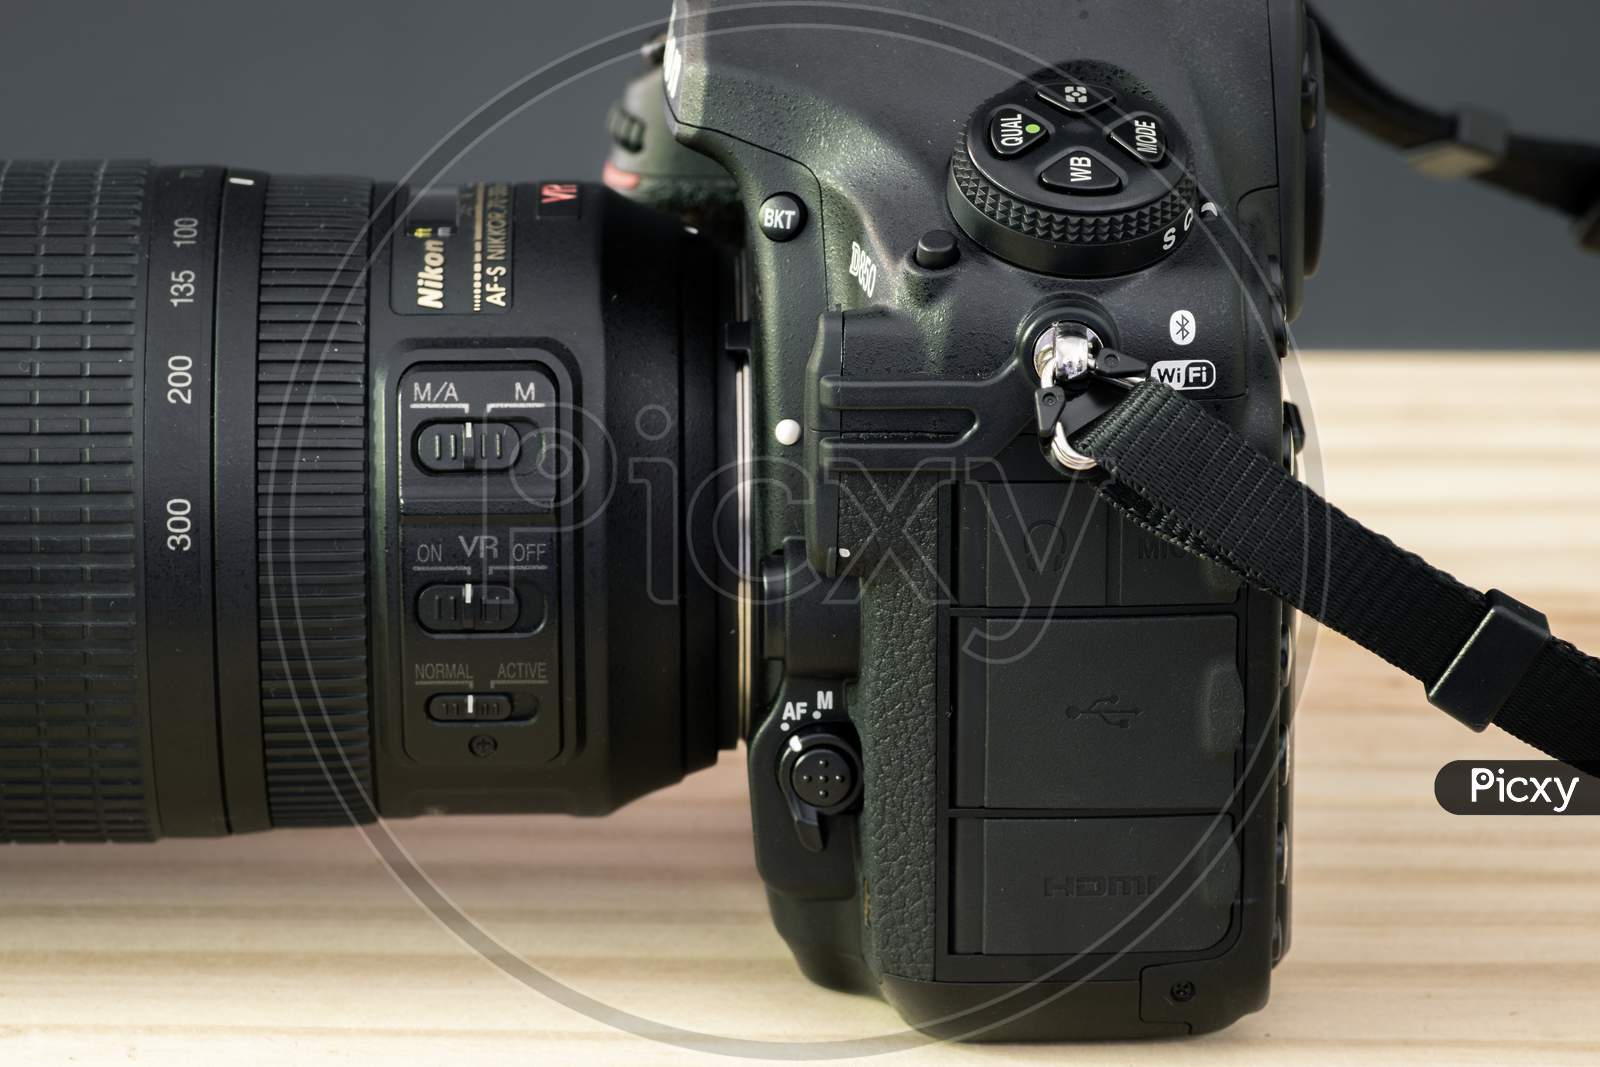 Galle, Sri Lanka - 02 17 2021: Nikon D850 Side View With A Lens, Featuring Bsi Cmos Sensor With No Optical Low Pass Filter With Expeed 5 Processor, Build With Extremely Durable Rugged Magnesium Alloy